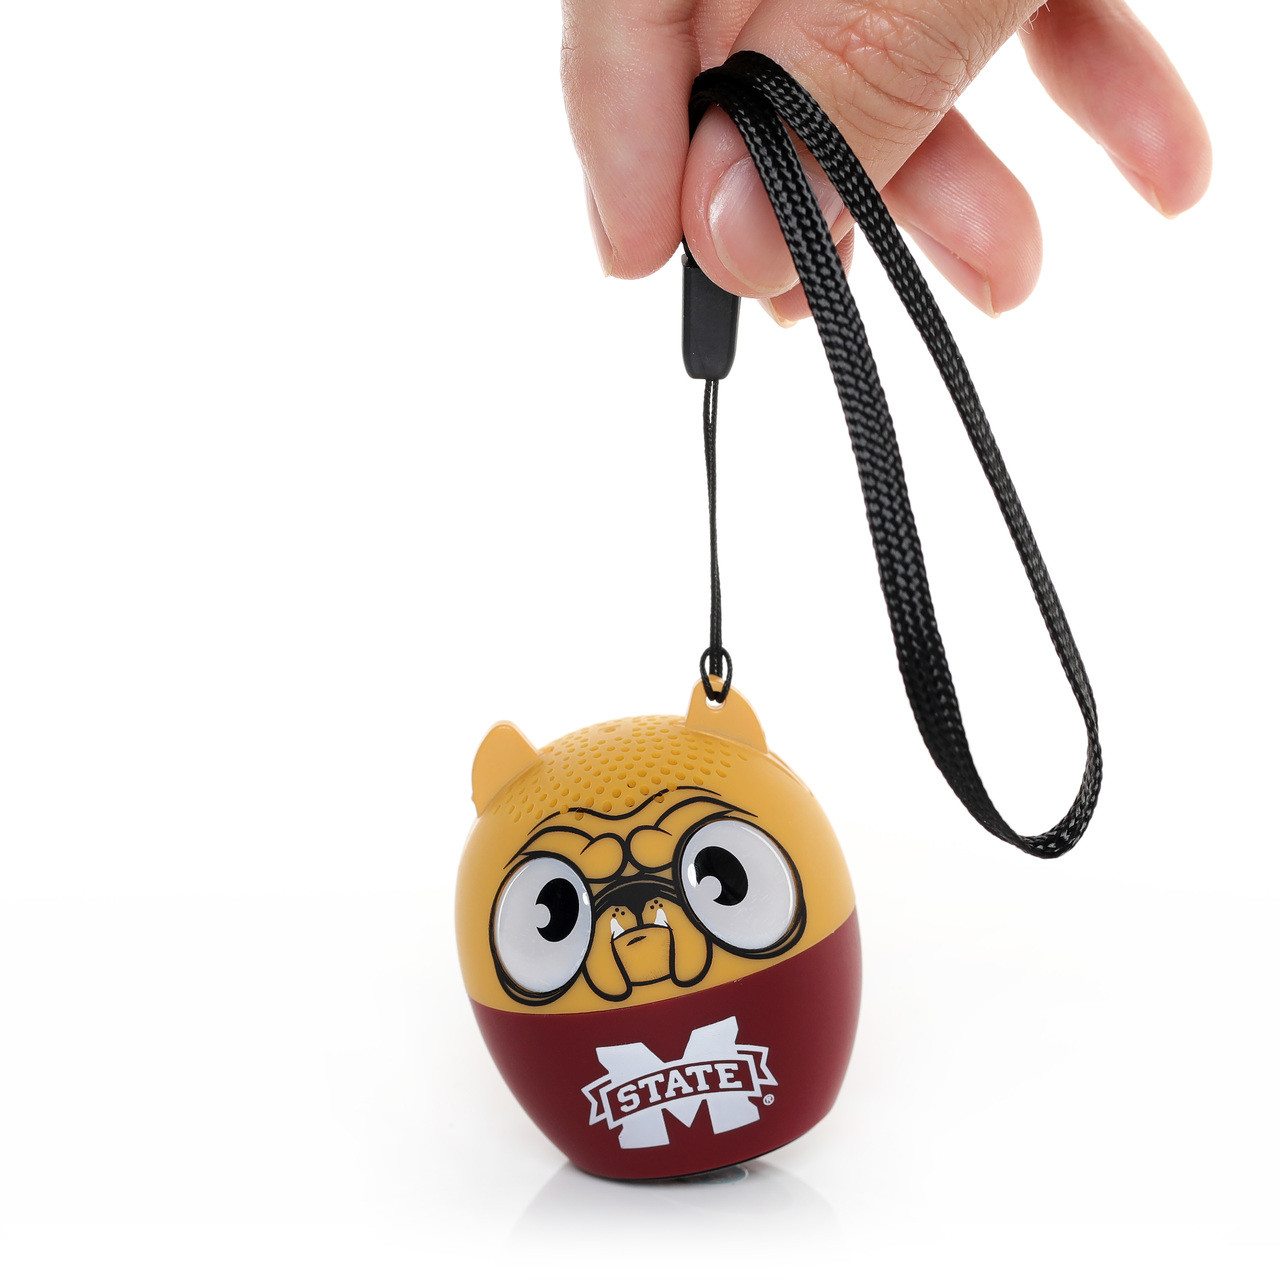 Mississippi State Bitty Boomer-NCAA Portable Wireless Bluetooth Speaker-Awesome Sound